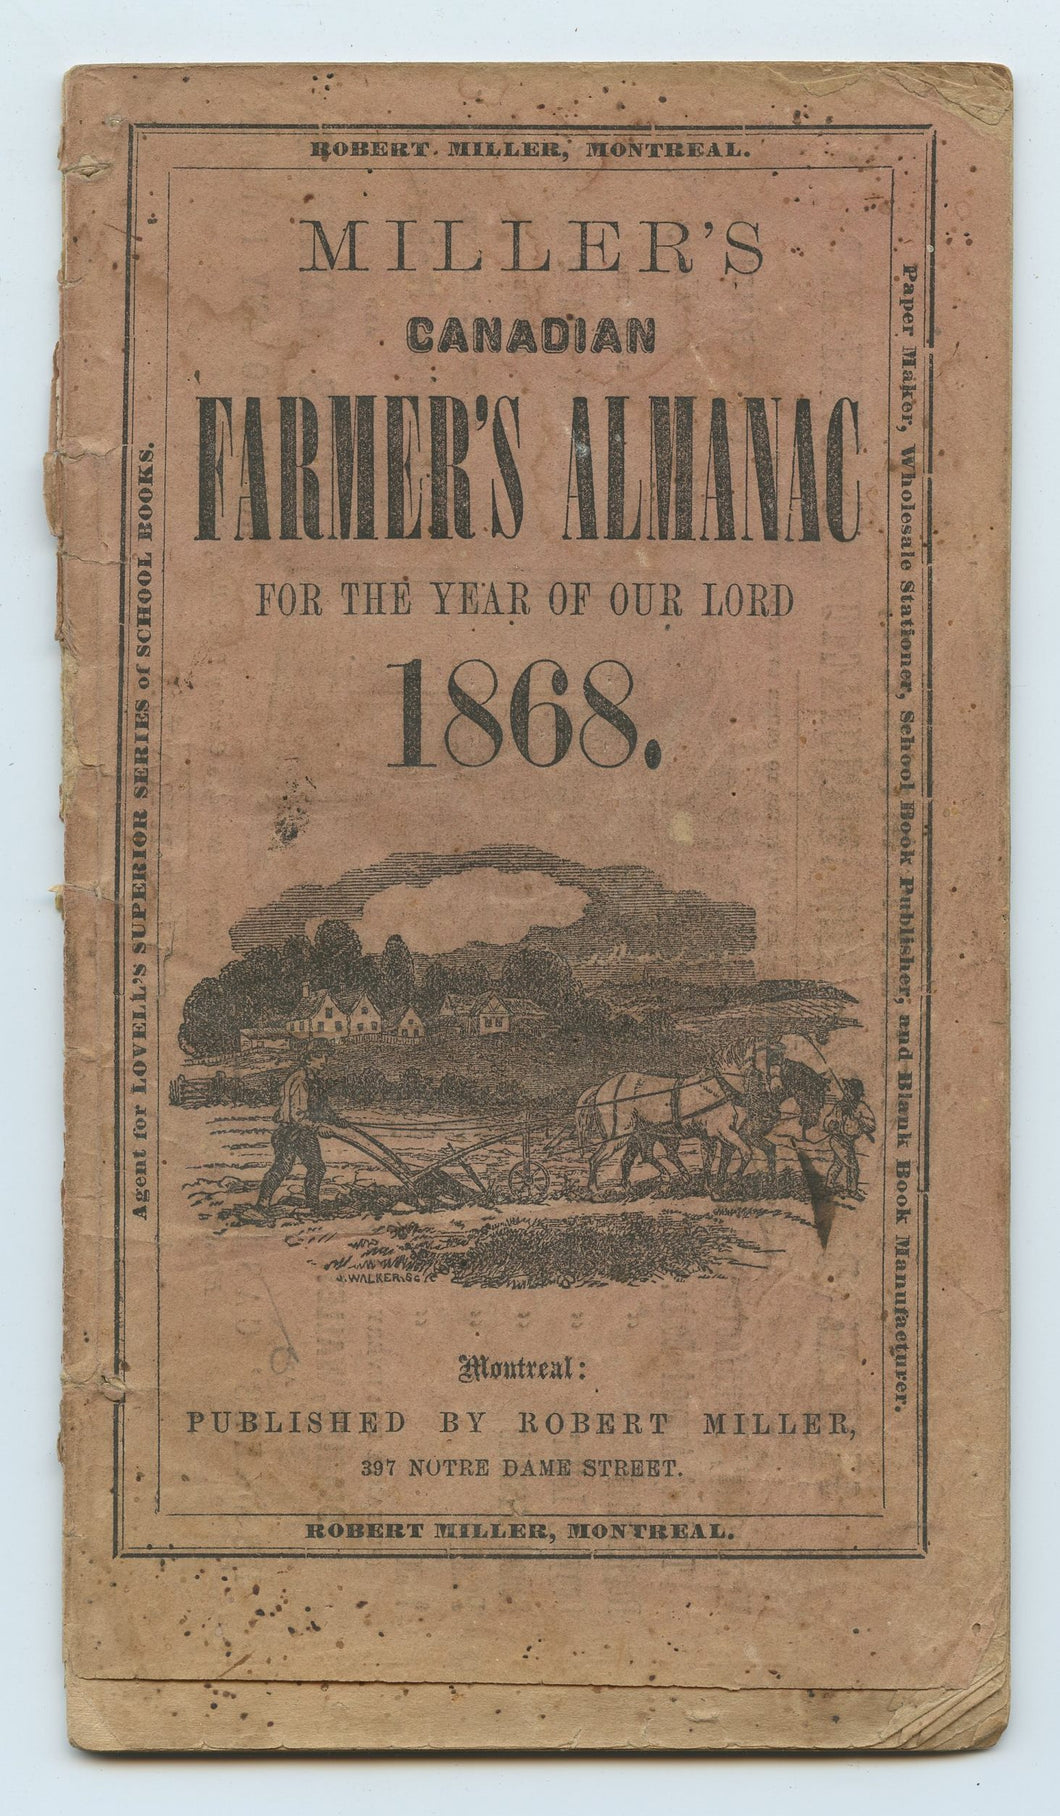 Miller's Canadian Farmer's Almanac for the Year of Our Lord 1868